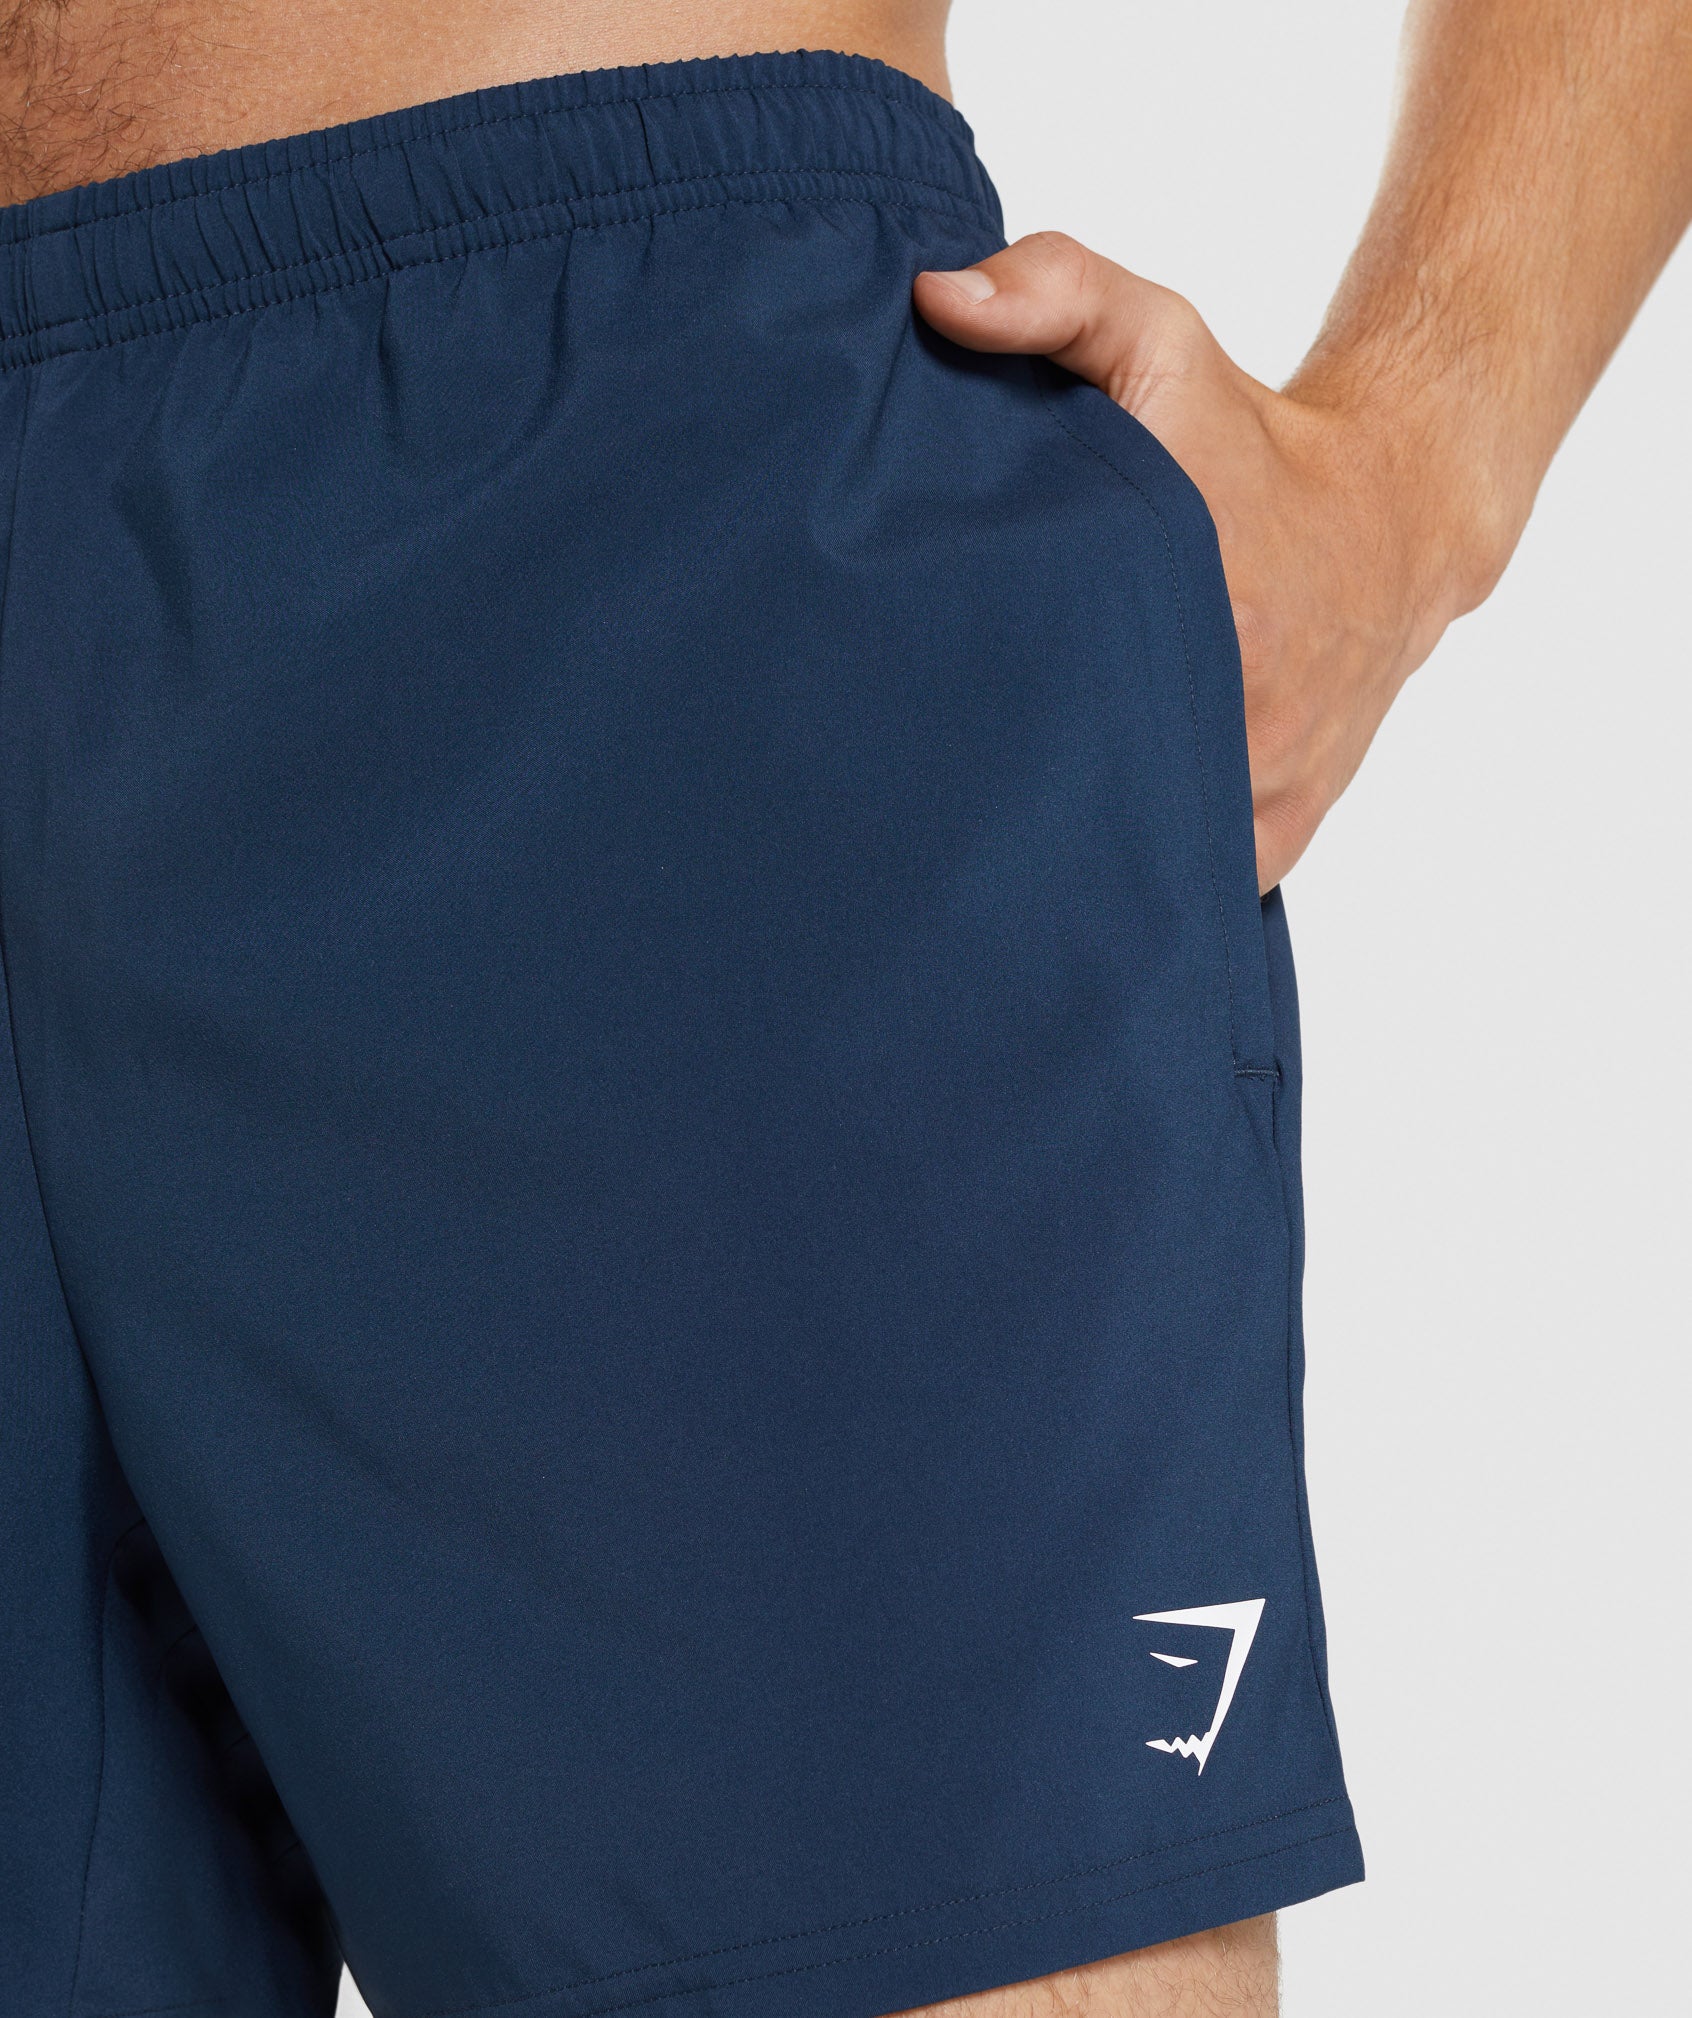 Arrival 5" Shorts in Navy - view 5